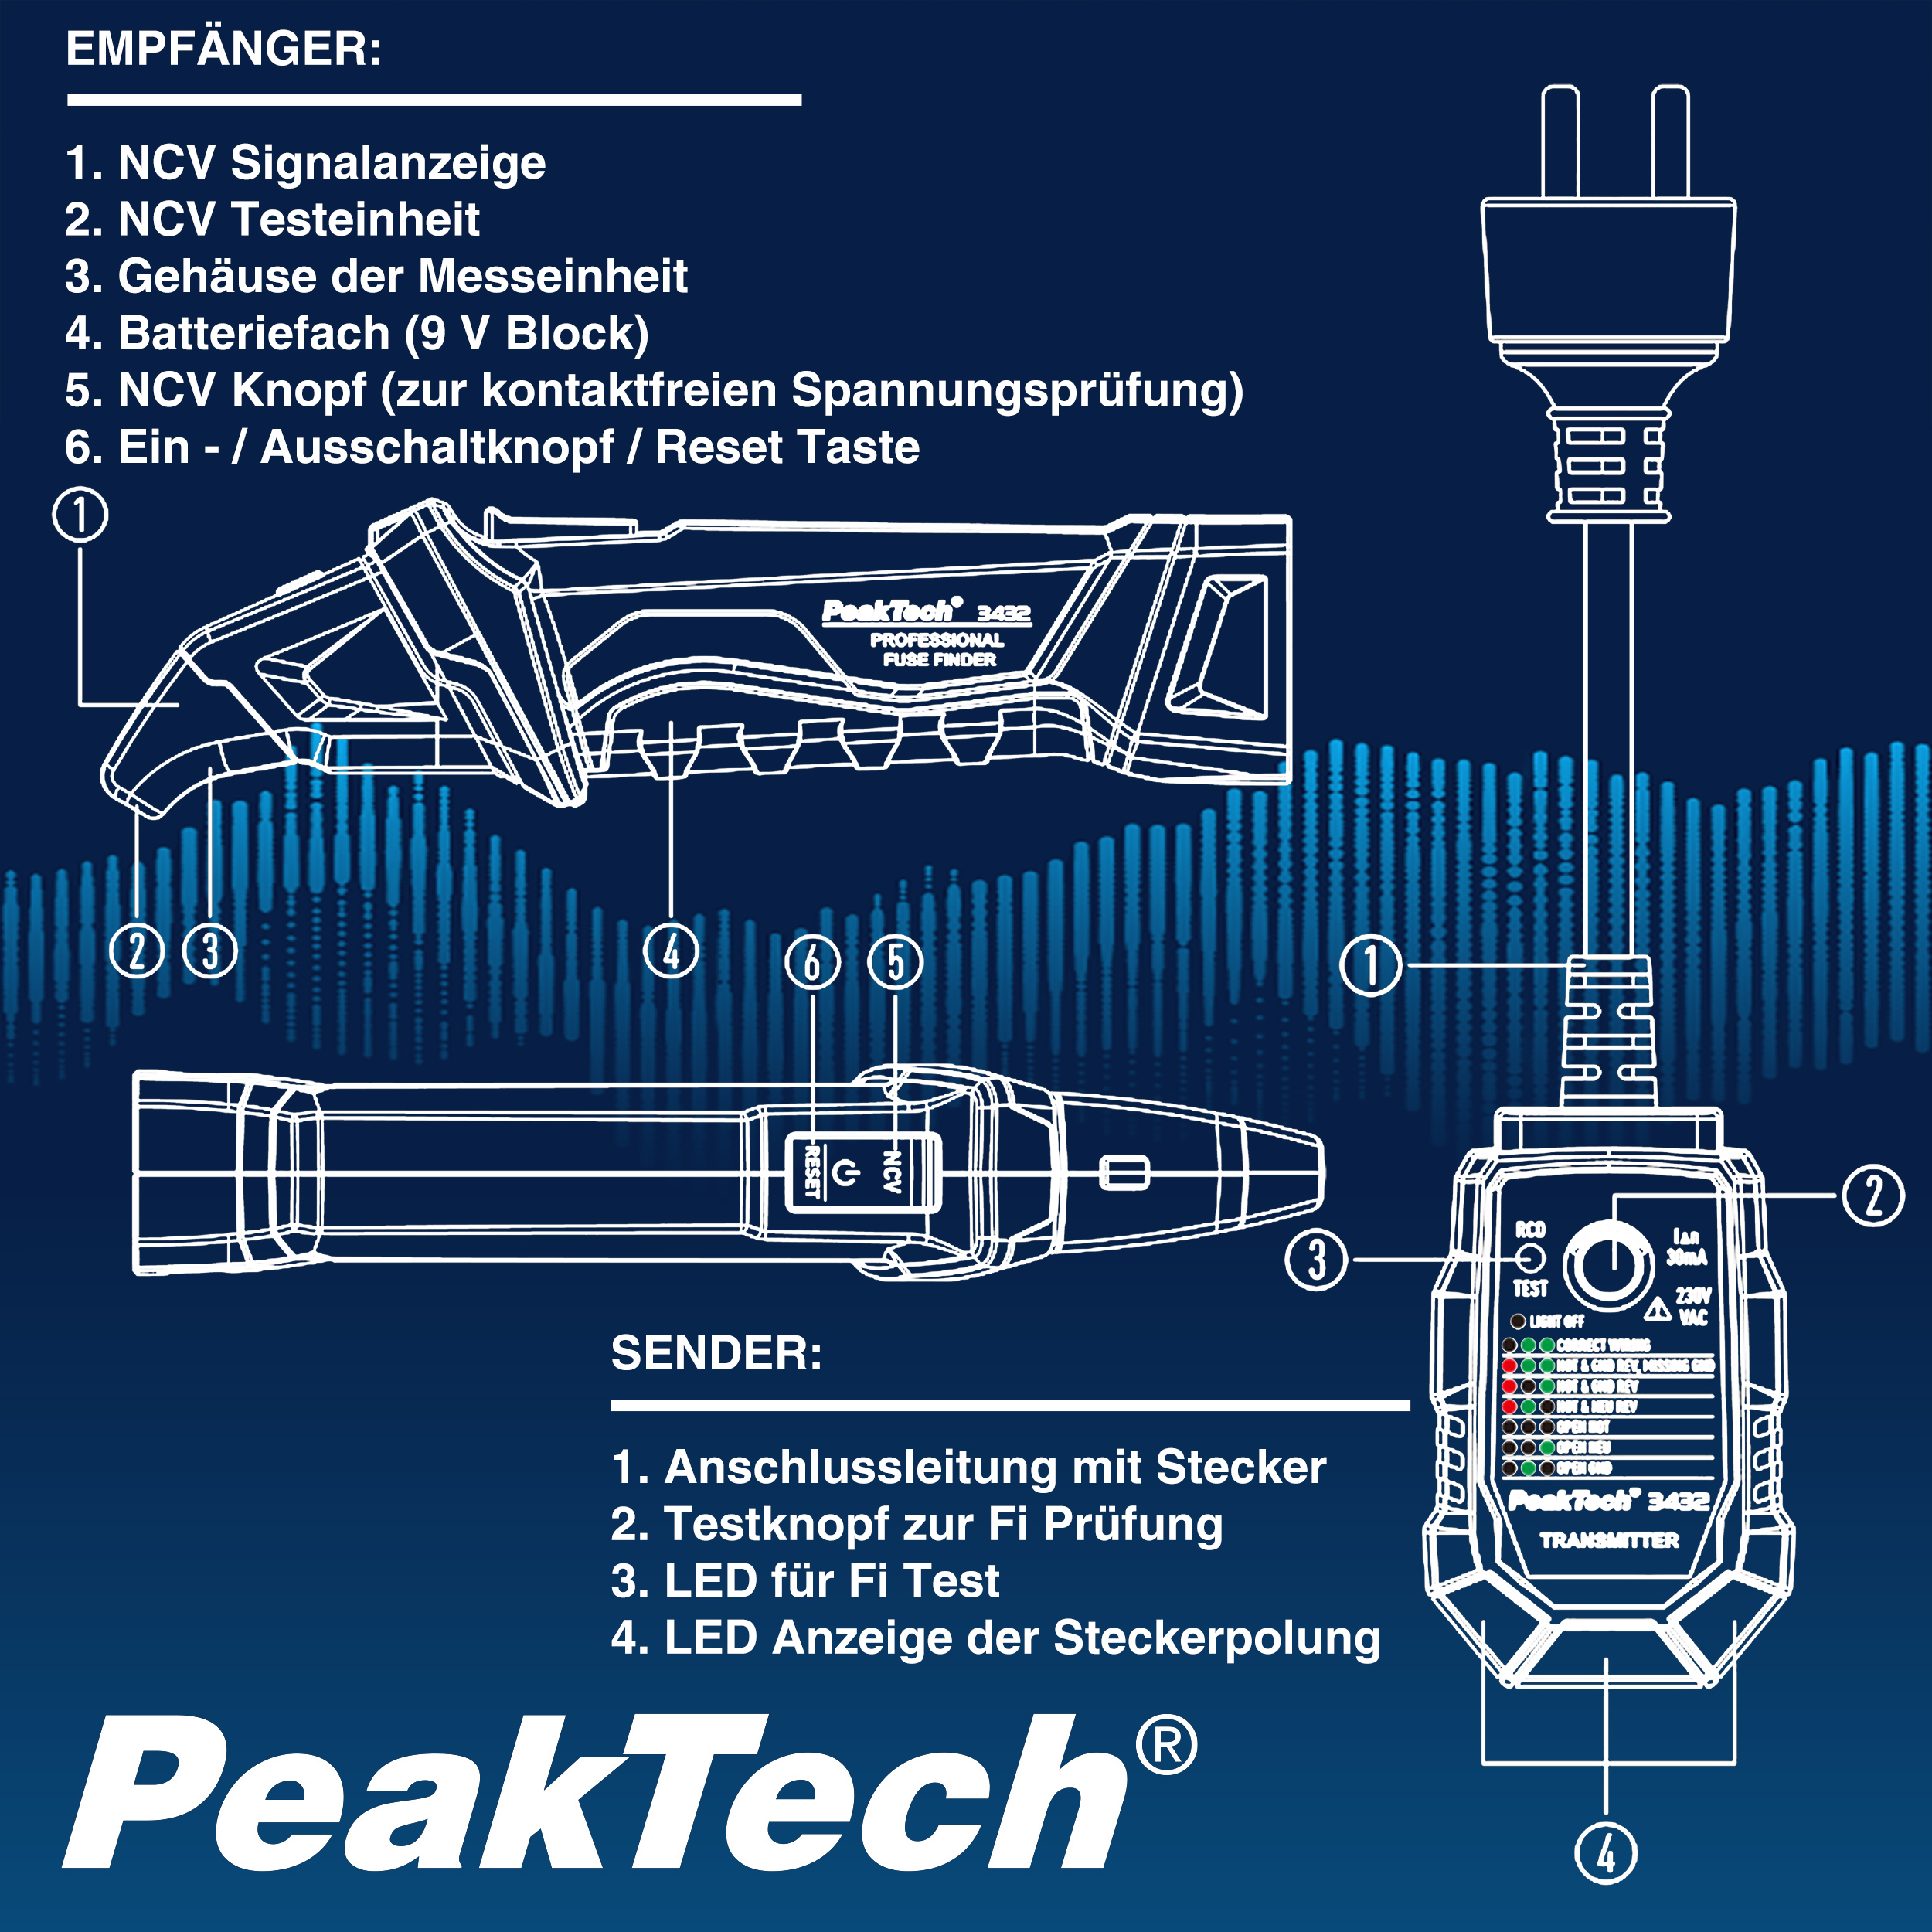 «PeakTech® P 3432» Fuse finder with RCD tester